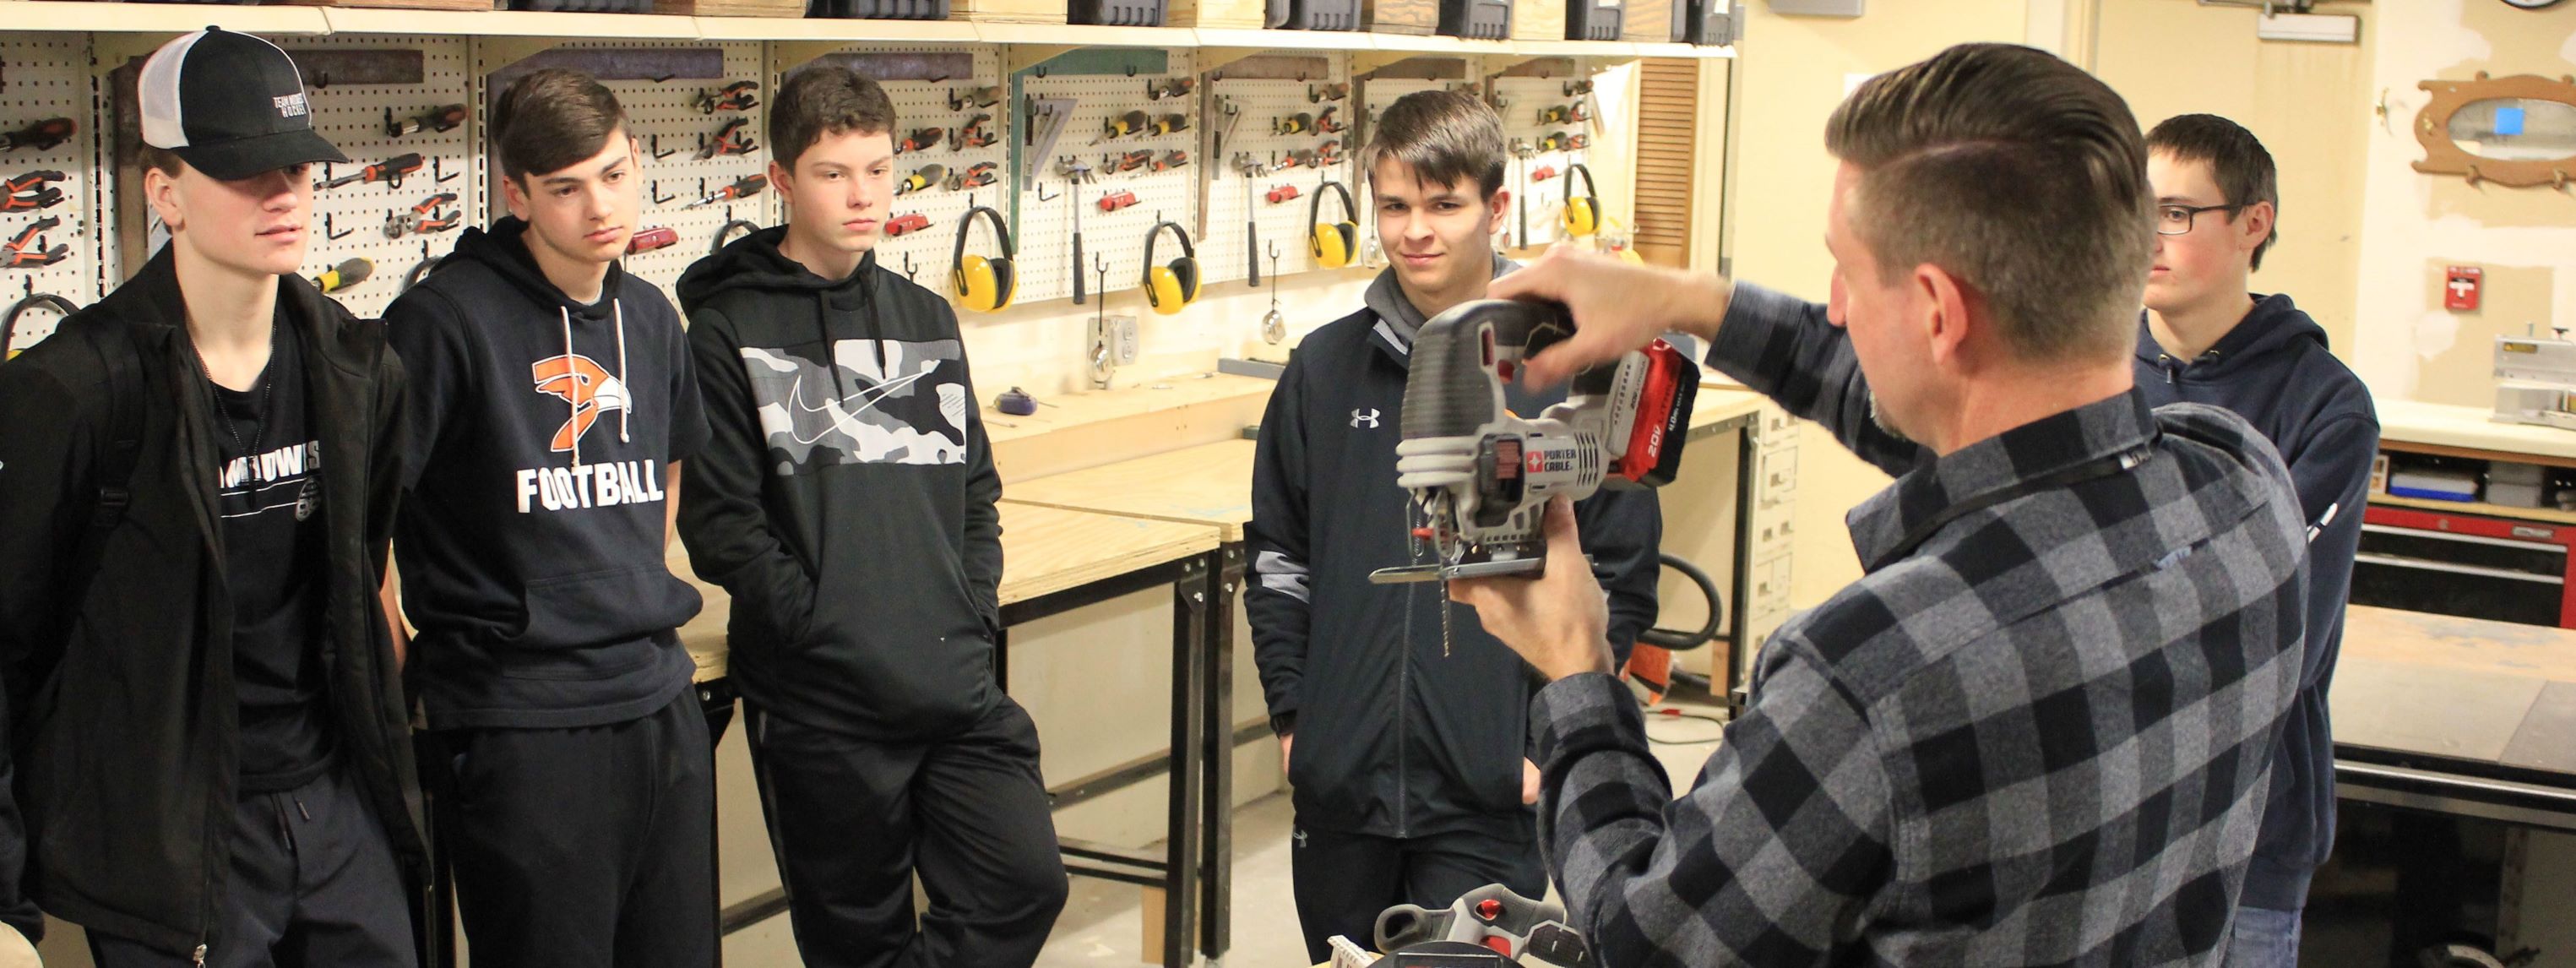 RAPIL Alum instructs an industrial technology lesson